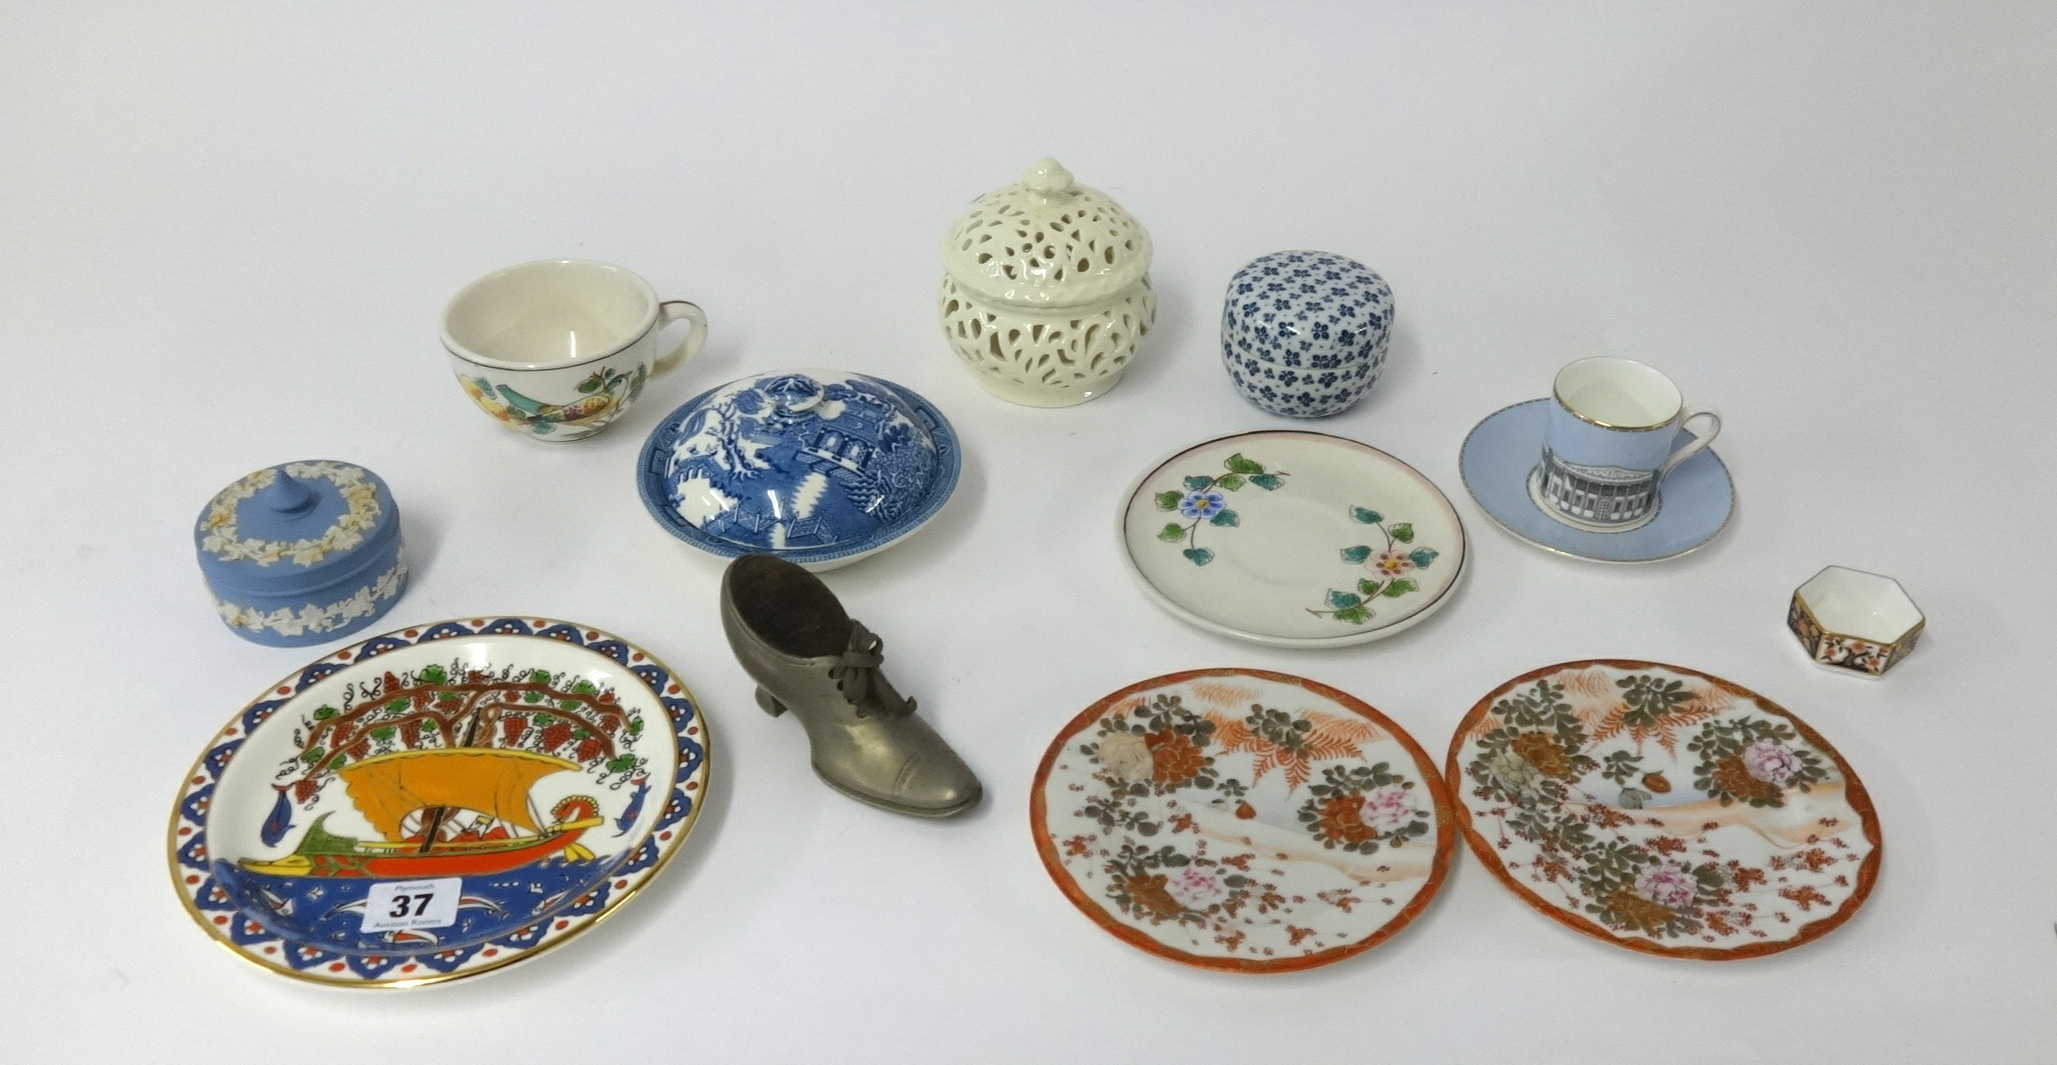 Various ornaments, plates, some Wedgwood boxes, bayonet etc.